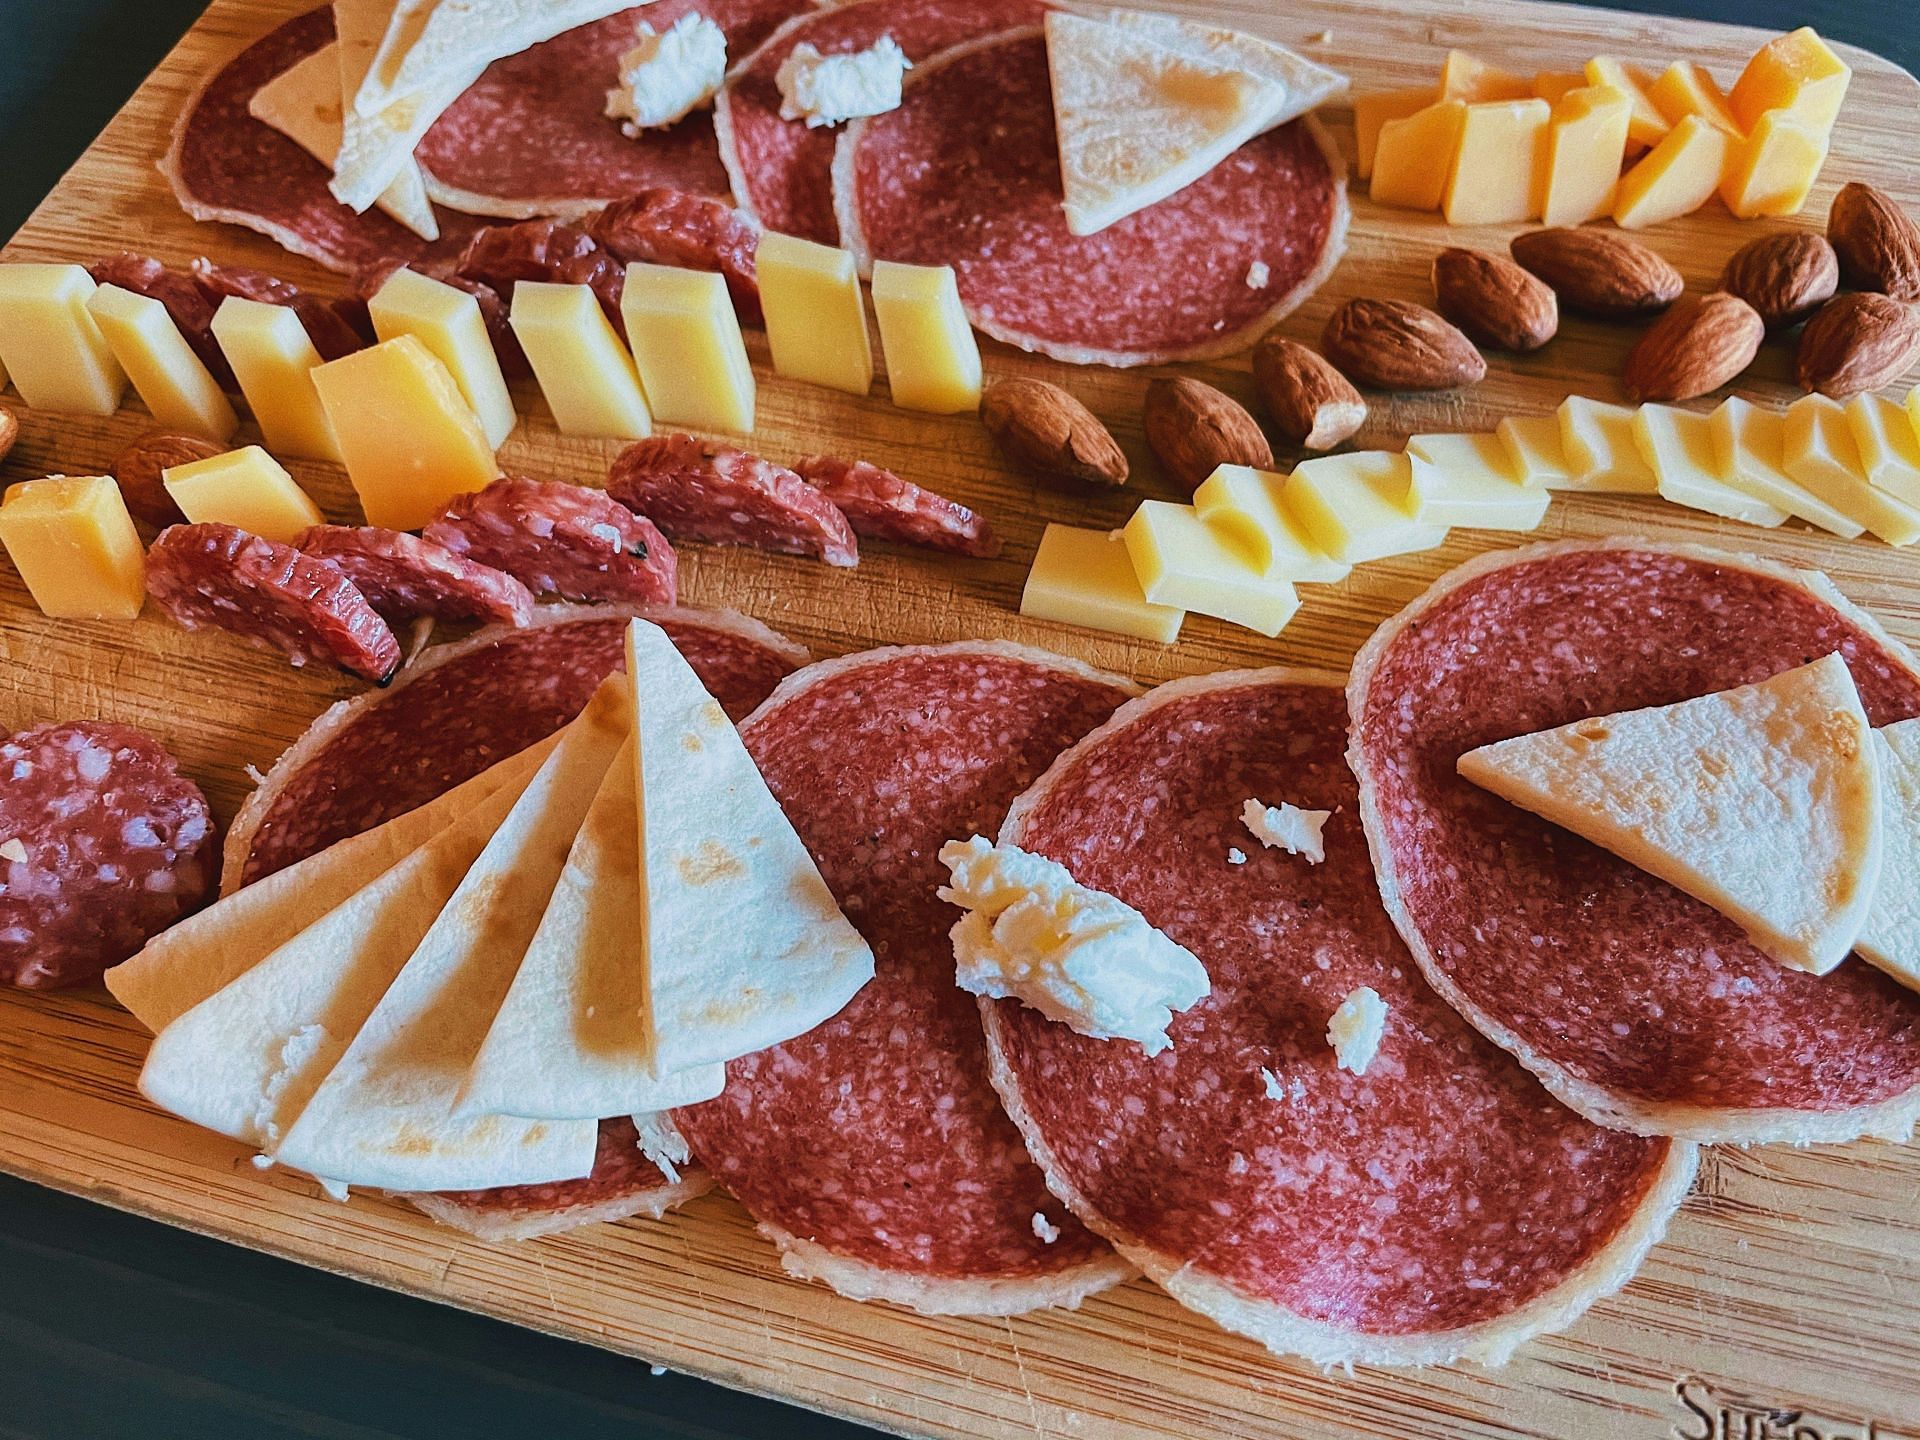 Avoid salami or processed meat (Image by Frank Zhang/Unsplash)